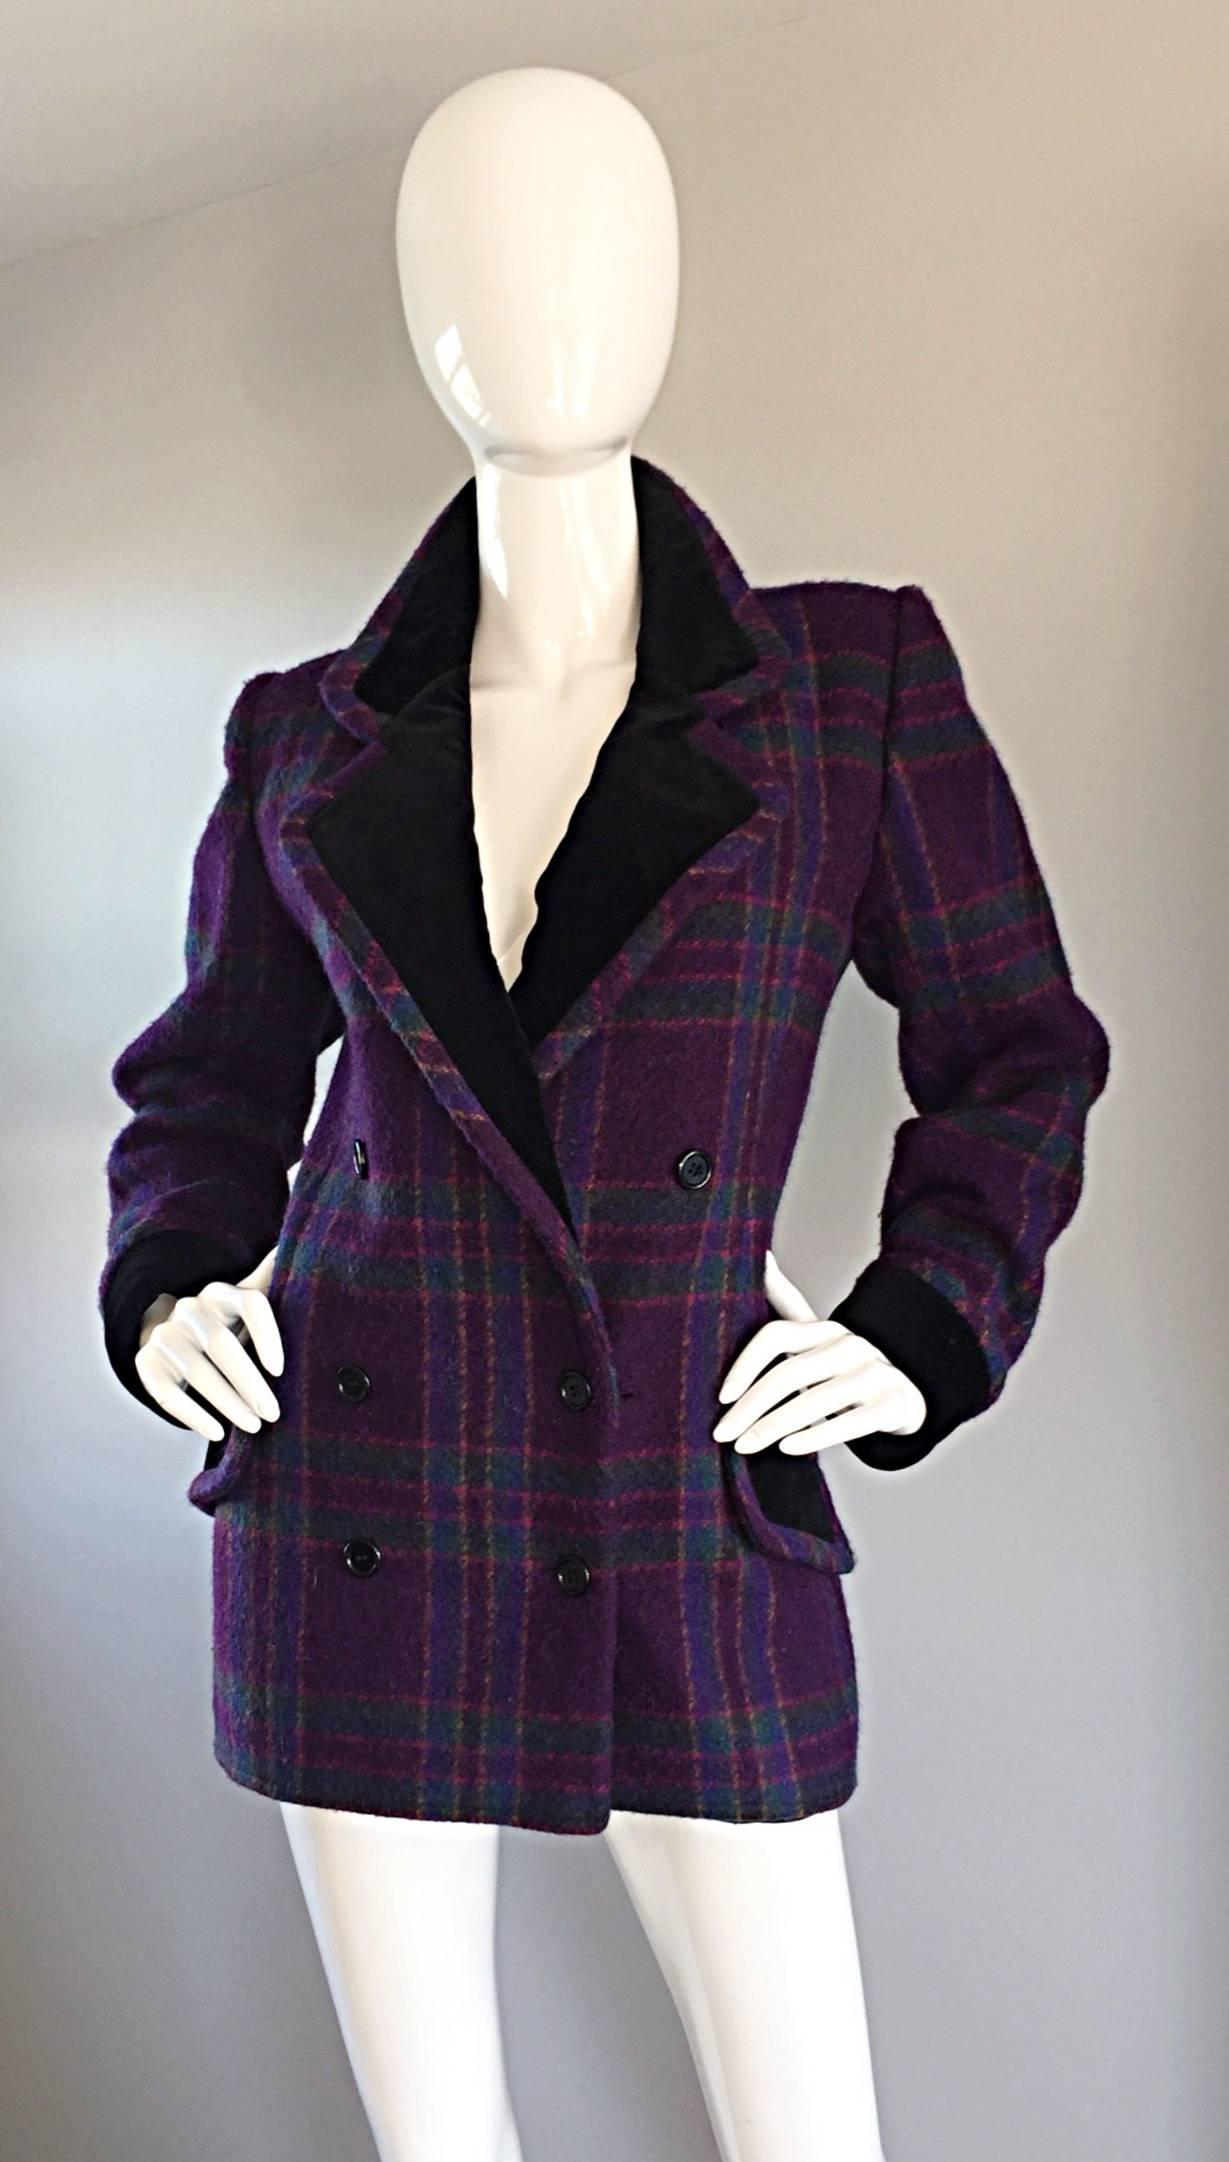 Chic vintage EMANUEL UNGARO regal purple, fuchsia, and green wool tartan plaid jacket! Collar, front pockets, and sleeve cuffs are trimmed in luxurious black velvet. Double breasted style, with a great fit! Looks great with a skirt, yet perfect with